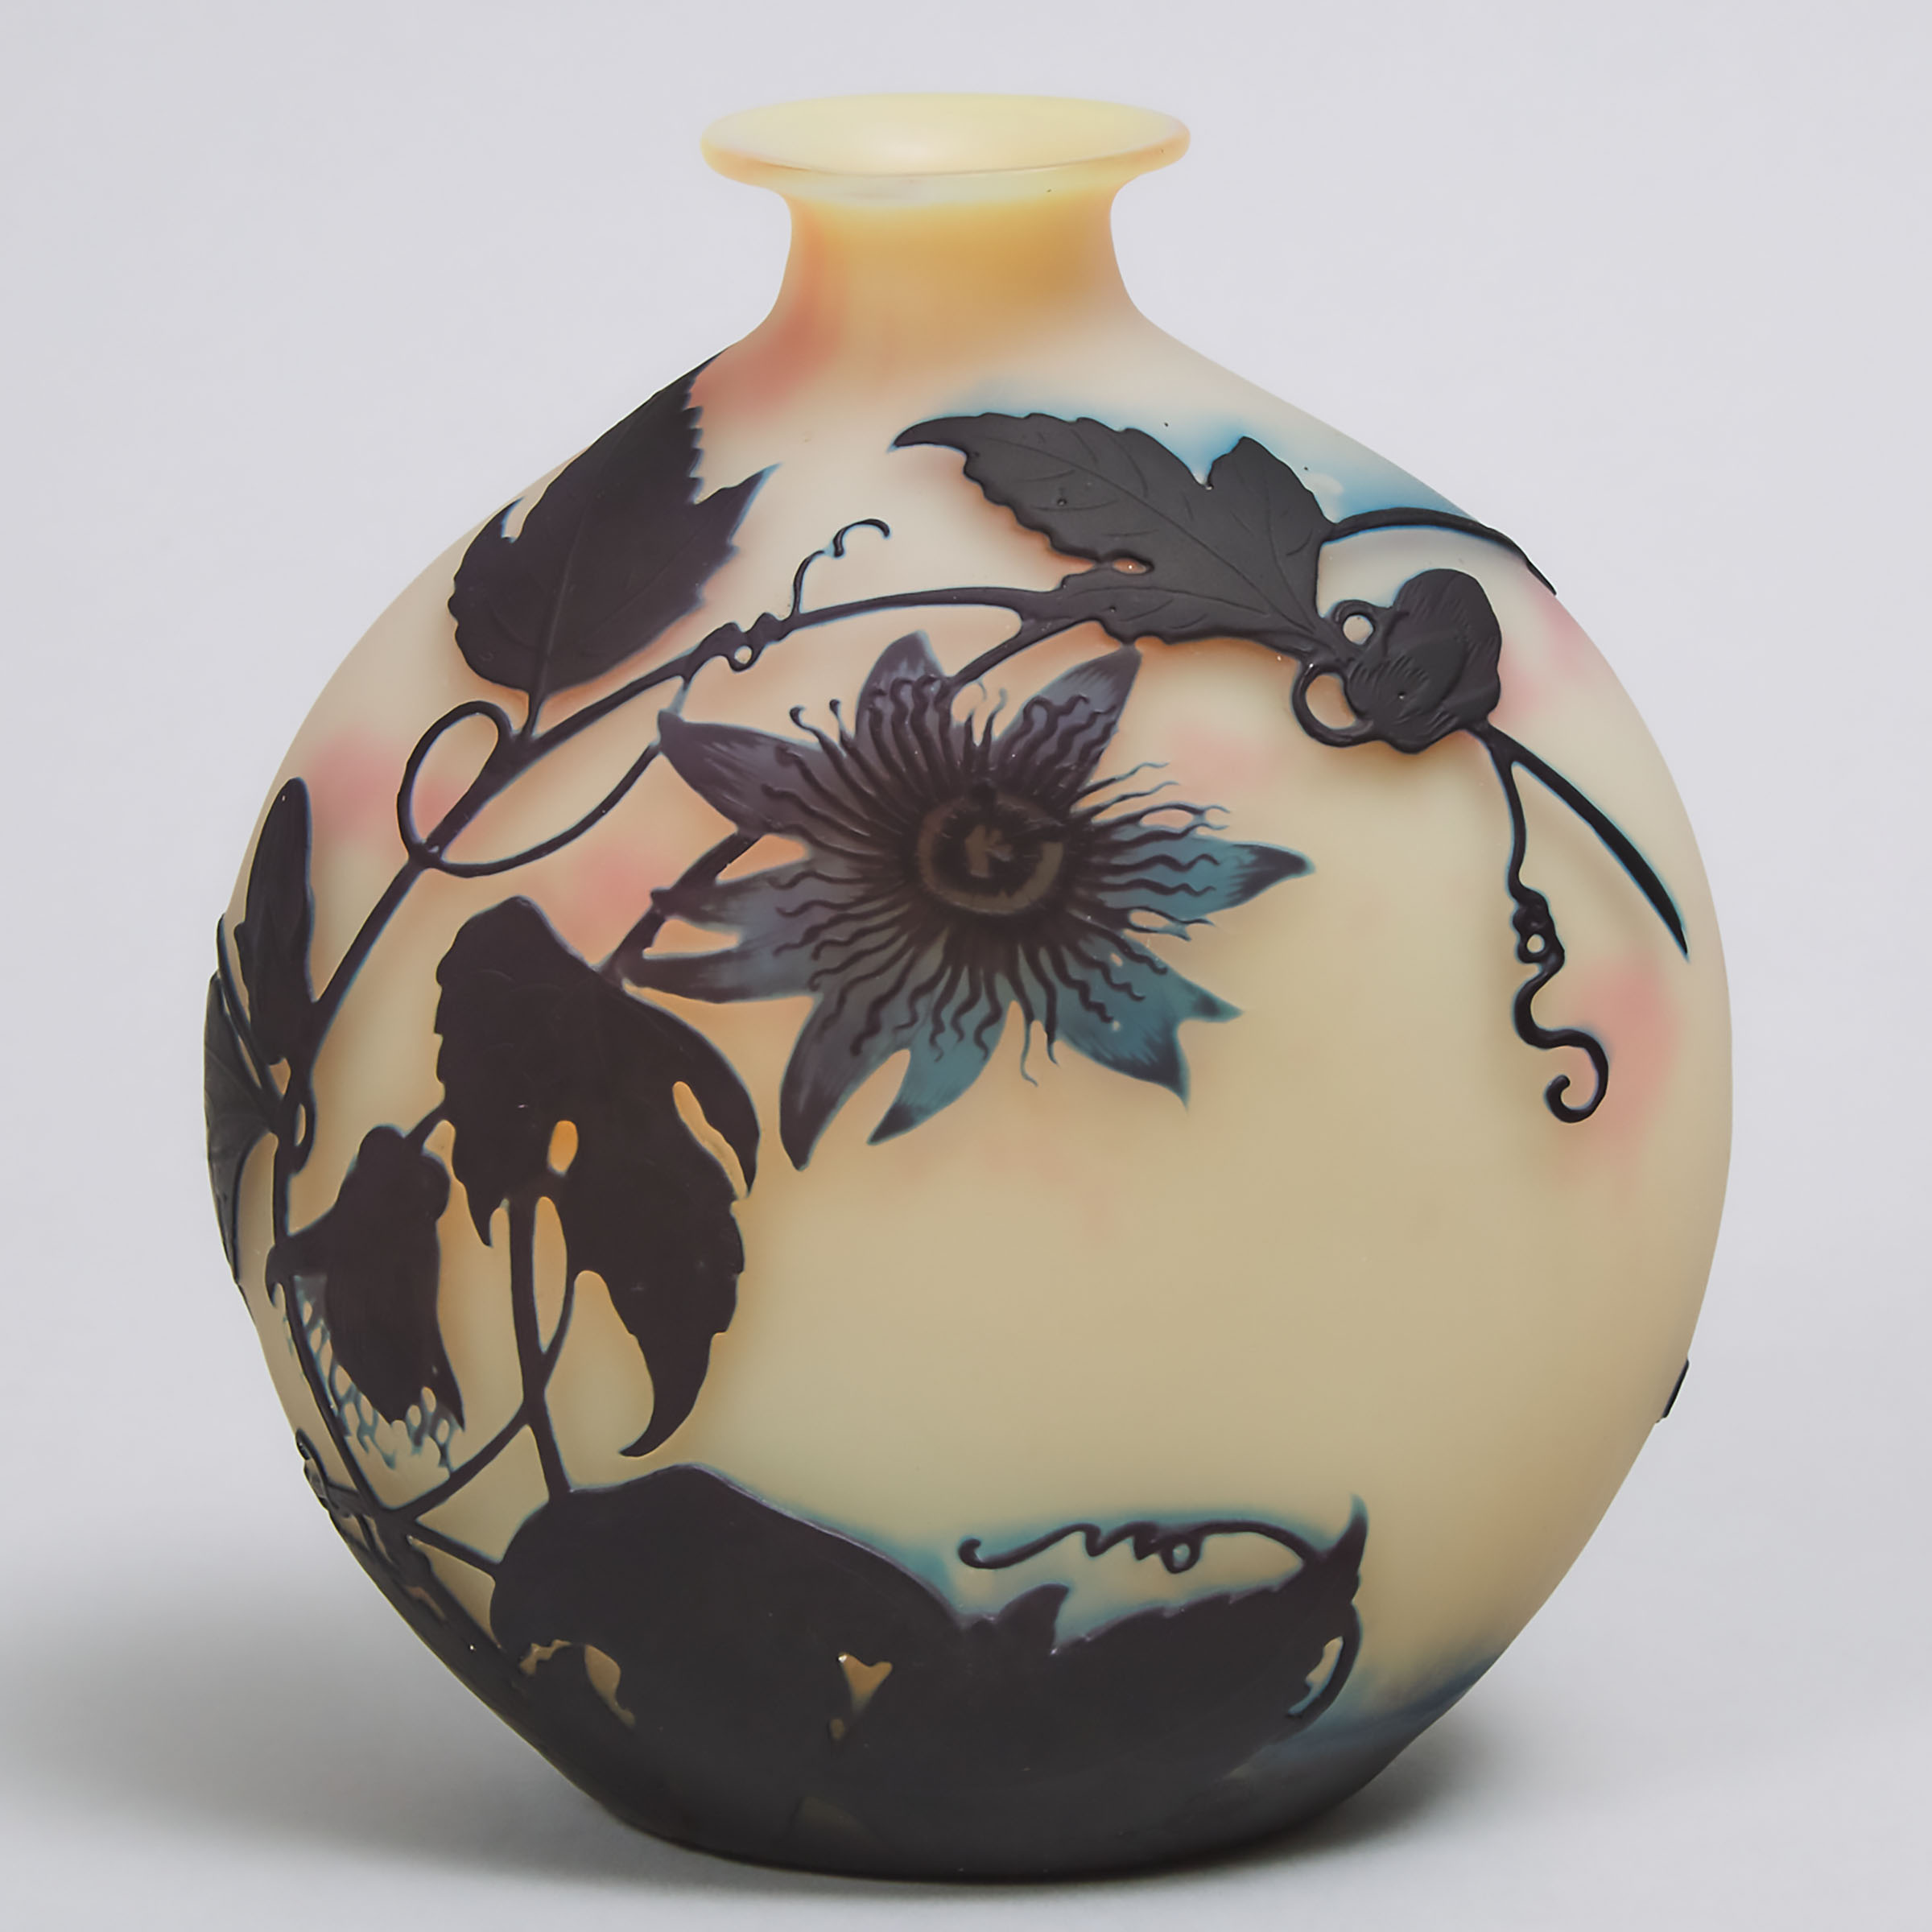 Muller Frères Cameo Glass 'Pilgrim' Vase, early 20th century